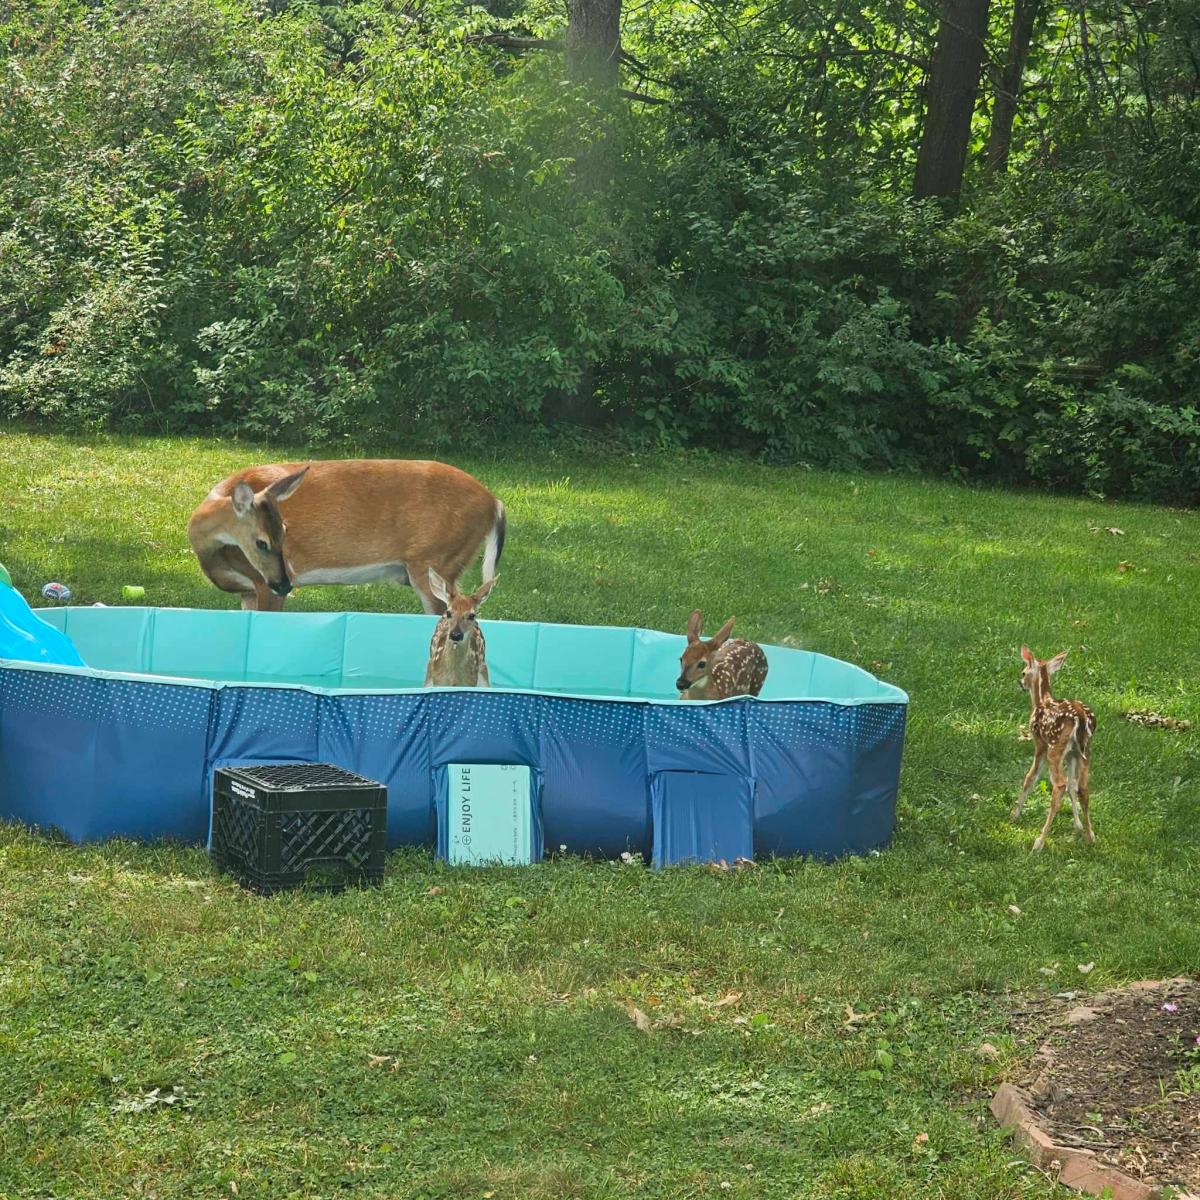 'Mom, our deer are famous': Stow woman's photos of baby deer playing in pool goes viral